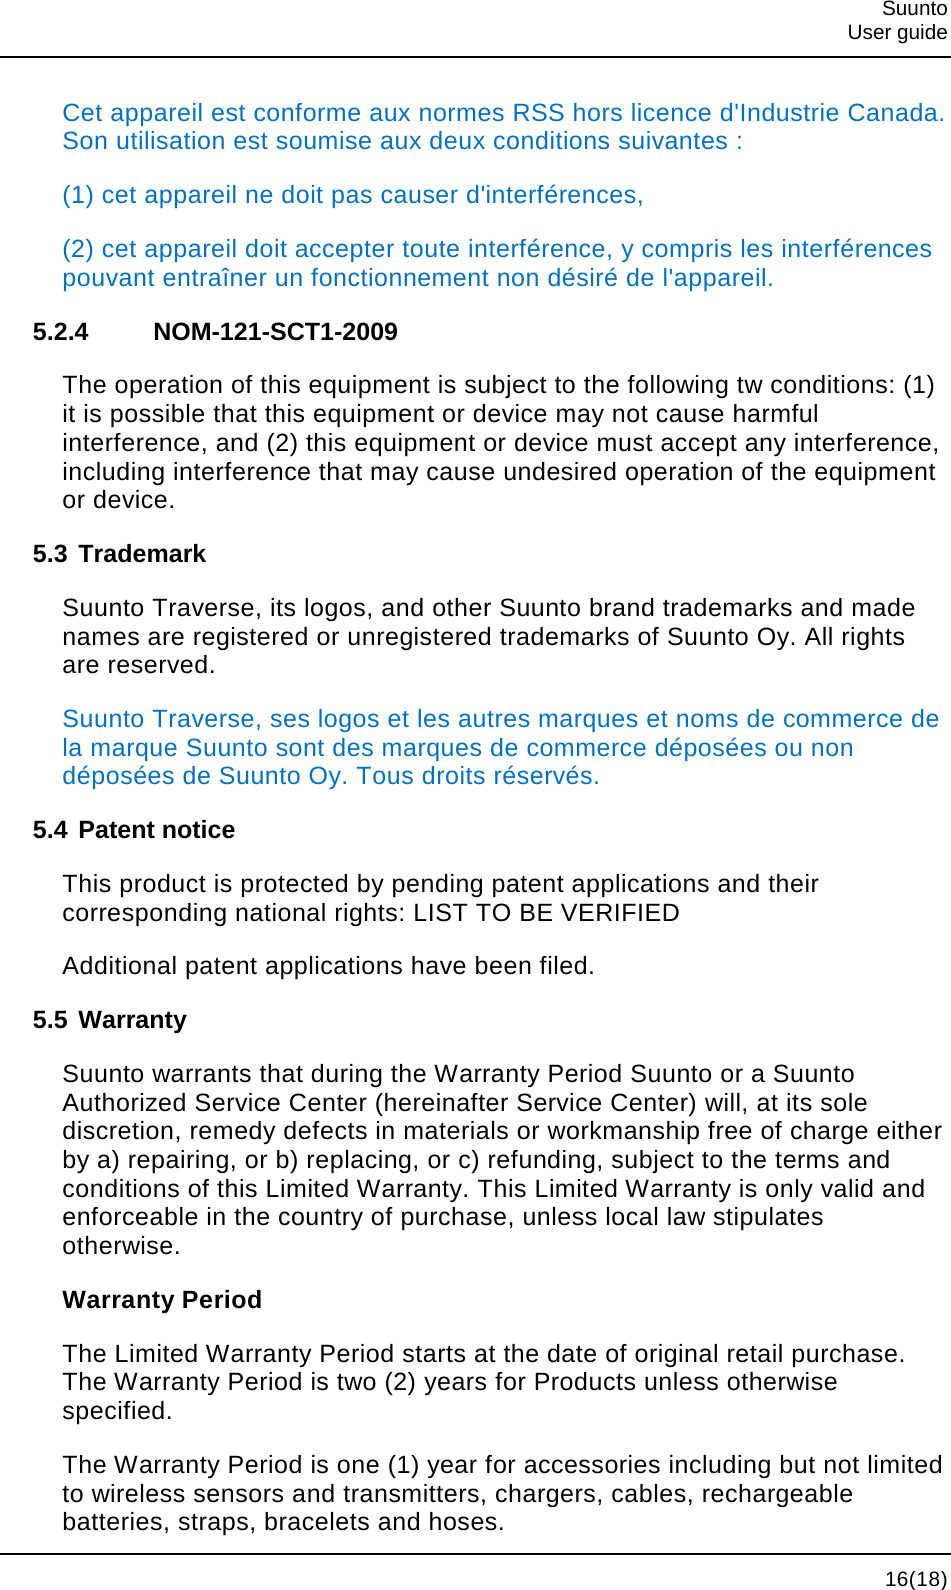  Suunto  User guide  16(18) Cet appareil est conforme aux normes RSS hors licence d&apos;Industrie Canada. Son utilisation est soumise aux deux conditions suivantes : (1) cet appareil ne doit pas causer d&apos;interférences, (2) cet appareil doit accepter toute interférence, y compris les interférences pouvant entraîner un fonctionnement non désiré de l&apos;appareil. 5.2.4 NOM-121-SCT1-2009 The operation of this equipment is subject to the following tw conditions: (1) it is possible that this equipment or device may not cause harmful interference, and (2) this equipment or device must accept any interference, including interference that may cause undesired operation of the equipment or device. 5.3 Trademark Suunto Traverse, its logos, and other Suunto brand trademarks and made names are registered or unregistered trademarks of Suunto Oy. All rights are reserved. Suunto Traverse, ses logos et les autres marques et noms de commerce de la marque Suunto sont des marques de commerce déposées ou non déposées de Suunto Oy. Tous droits réservés. 5.4 Patent notice This product is protected by pending patent applications and their corresponding national rights: LIST TO BE VERIFIED Additional patent applications have been filed. 5.5 Warranty Suunto warrants that during the Warranty Period Suunto or a Suunto Authorized Service Center (hereinafter Service Center) will, at its sole discretion, remedy defects in materials or workmanship free of charge either by a) repairing, or b) replacing, or c) refunding, subject to the terms and conditions of this Limited Warranty. This Limited Warranty is only valid and enforceable in the country of purchase, unless local law stipulates otherwise. Warranty Period The Limited Warranty Period starts at the date of original retail purchase. The Warranty Period is two (2) years for Products unless otherwise specified. The Warranty Period is one (1) year for accessories including but not limited to wireless sensors and transmitters, chargers, cables, rechargeable batteries, straps, bracelets and hoses. 